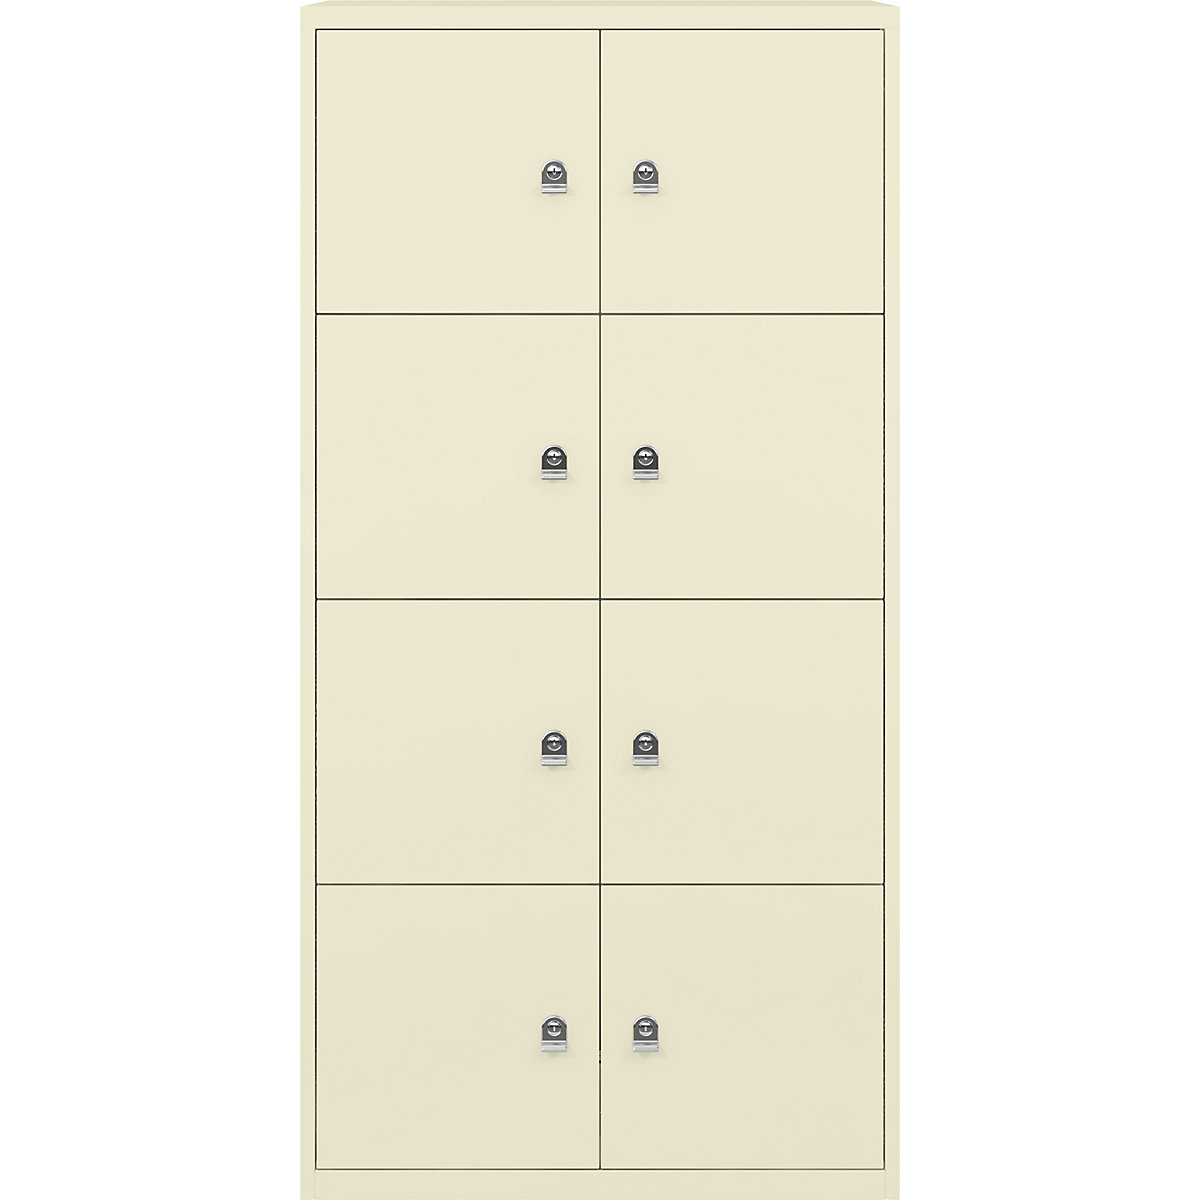 BISLEY – LateralFile™ lodge, with 8 lockable compartments, height 375 mm each, light ivory